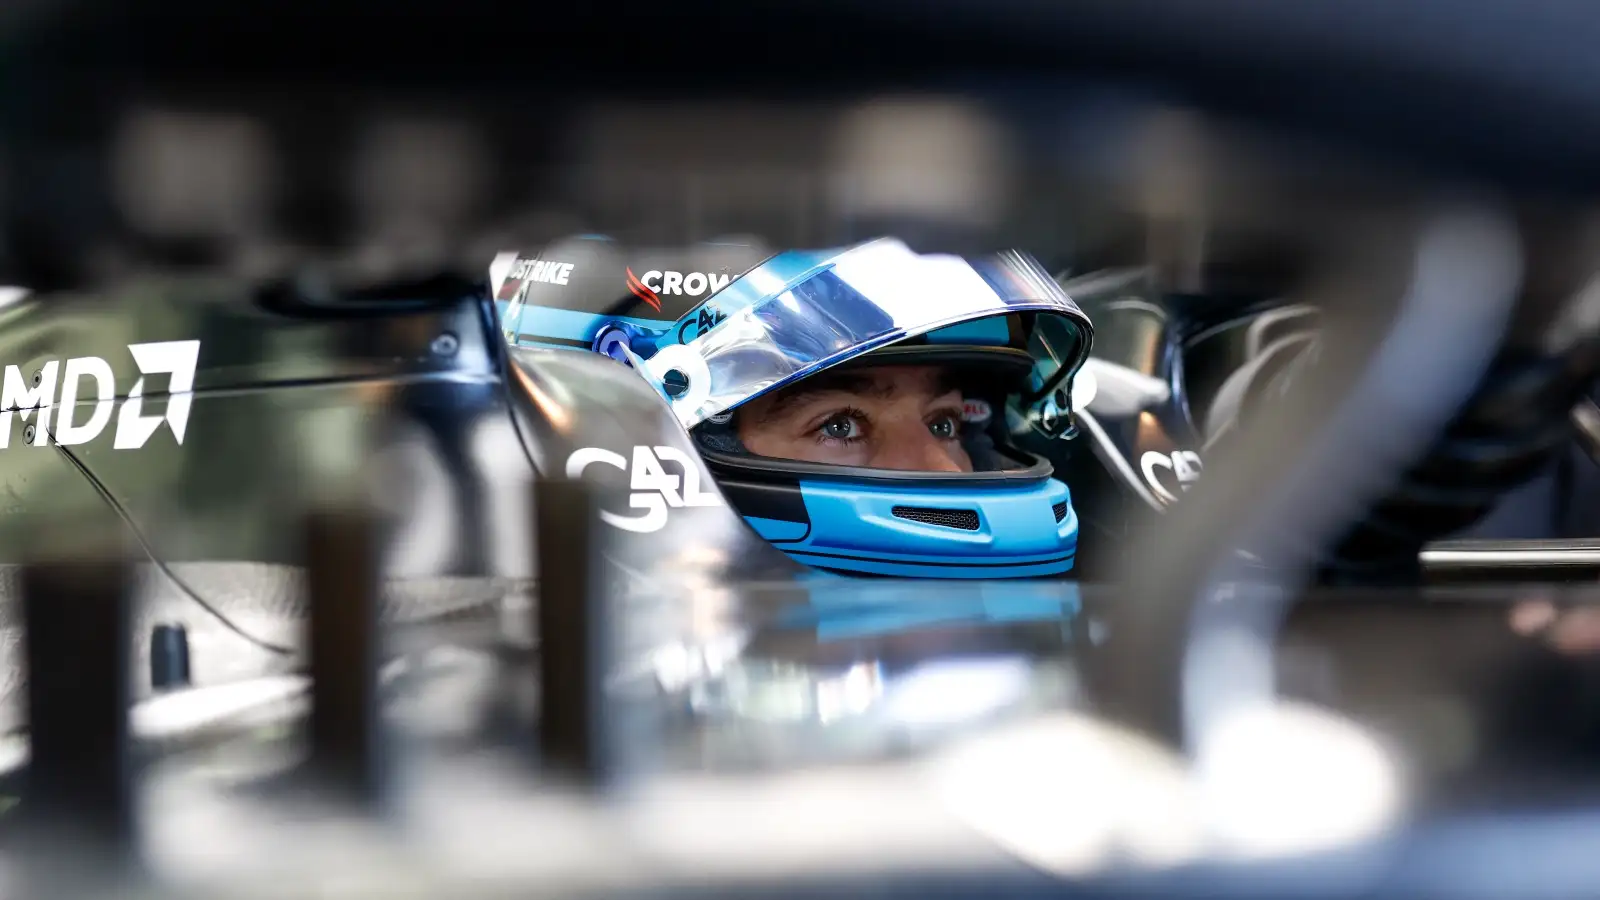 George Russell in the W14 cockpit. Bahrain, February 2023.